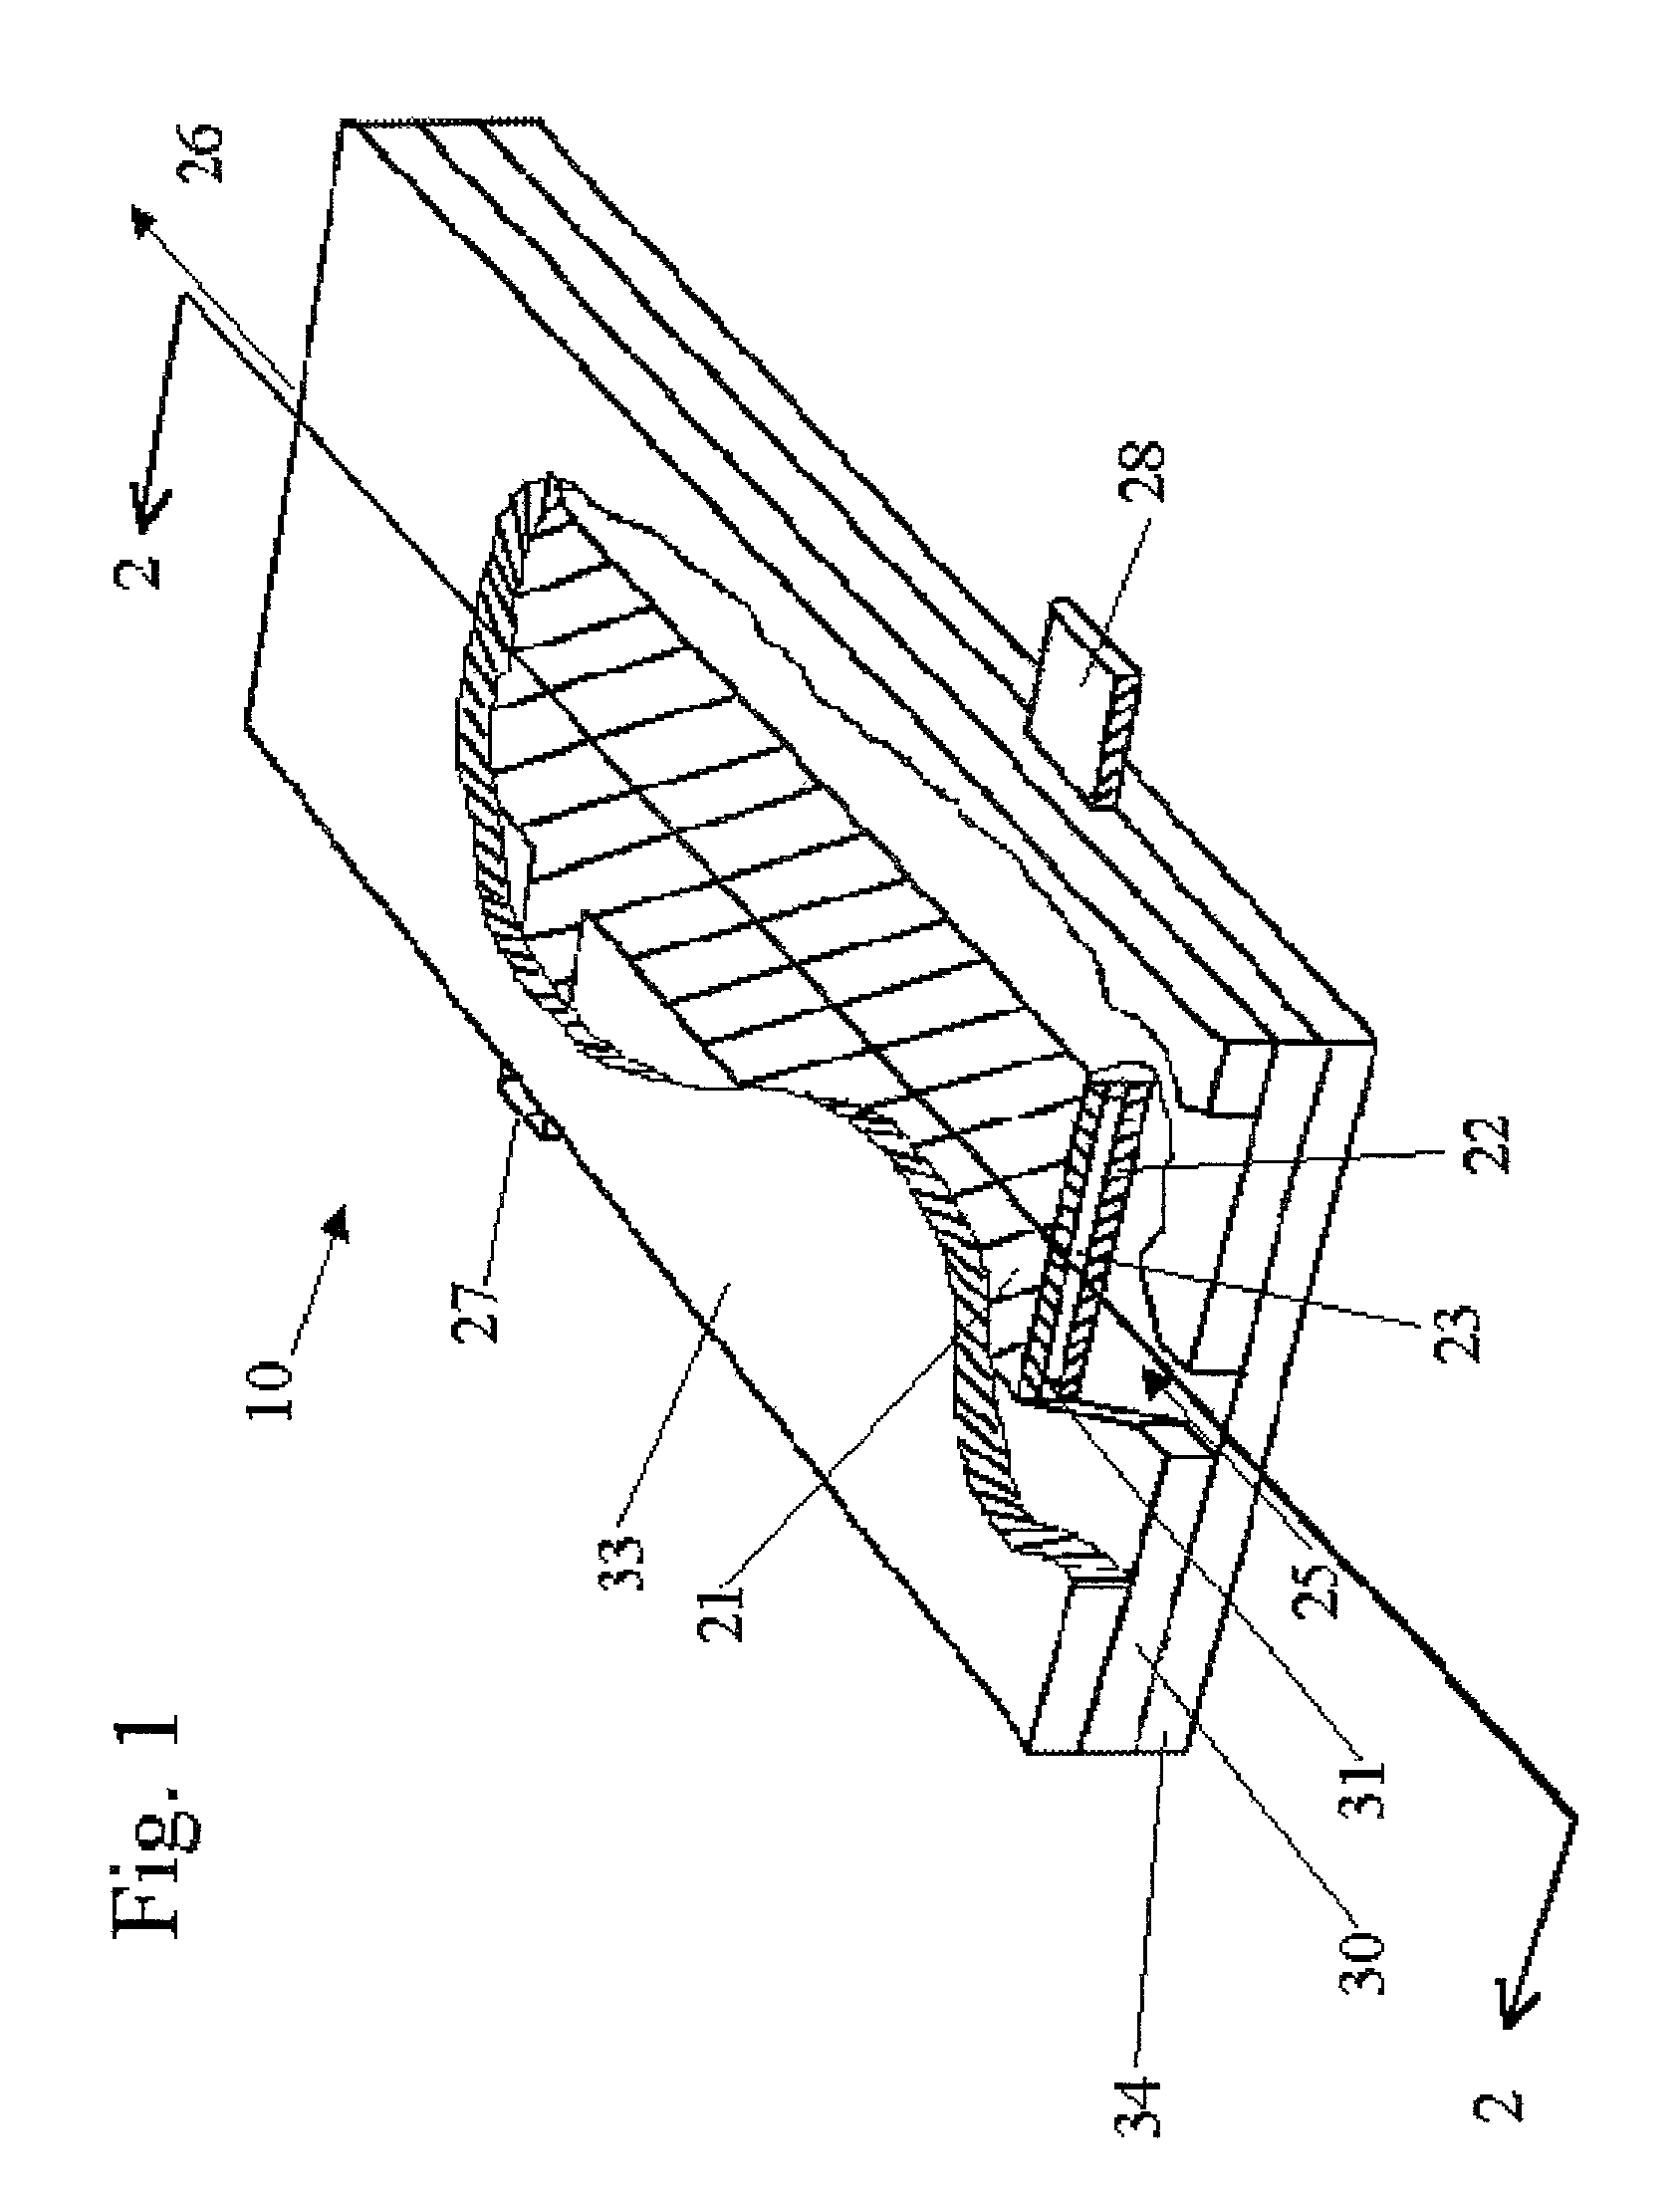 Electrolysis cell for generating chlorine dioxide